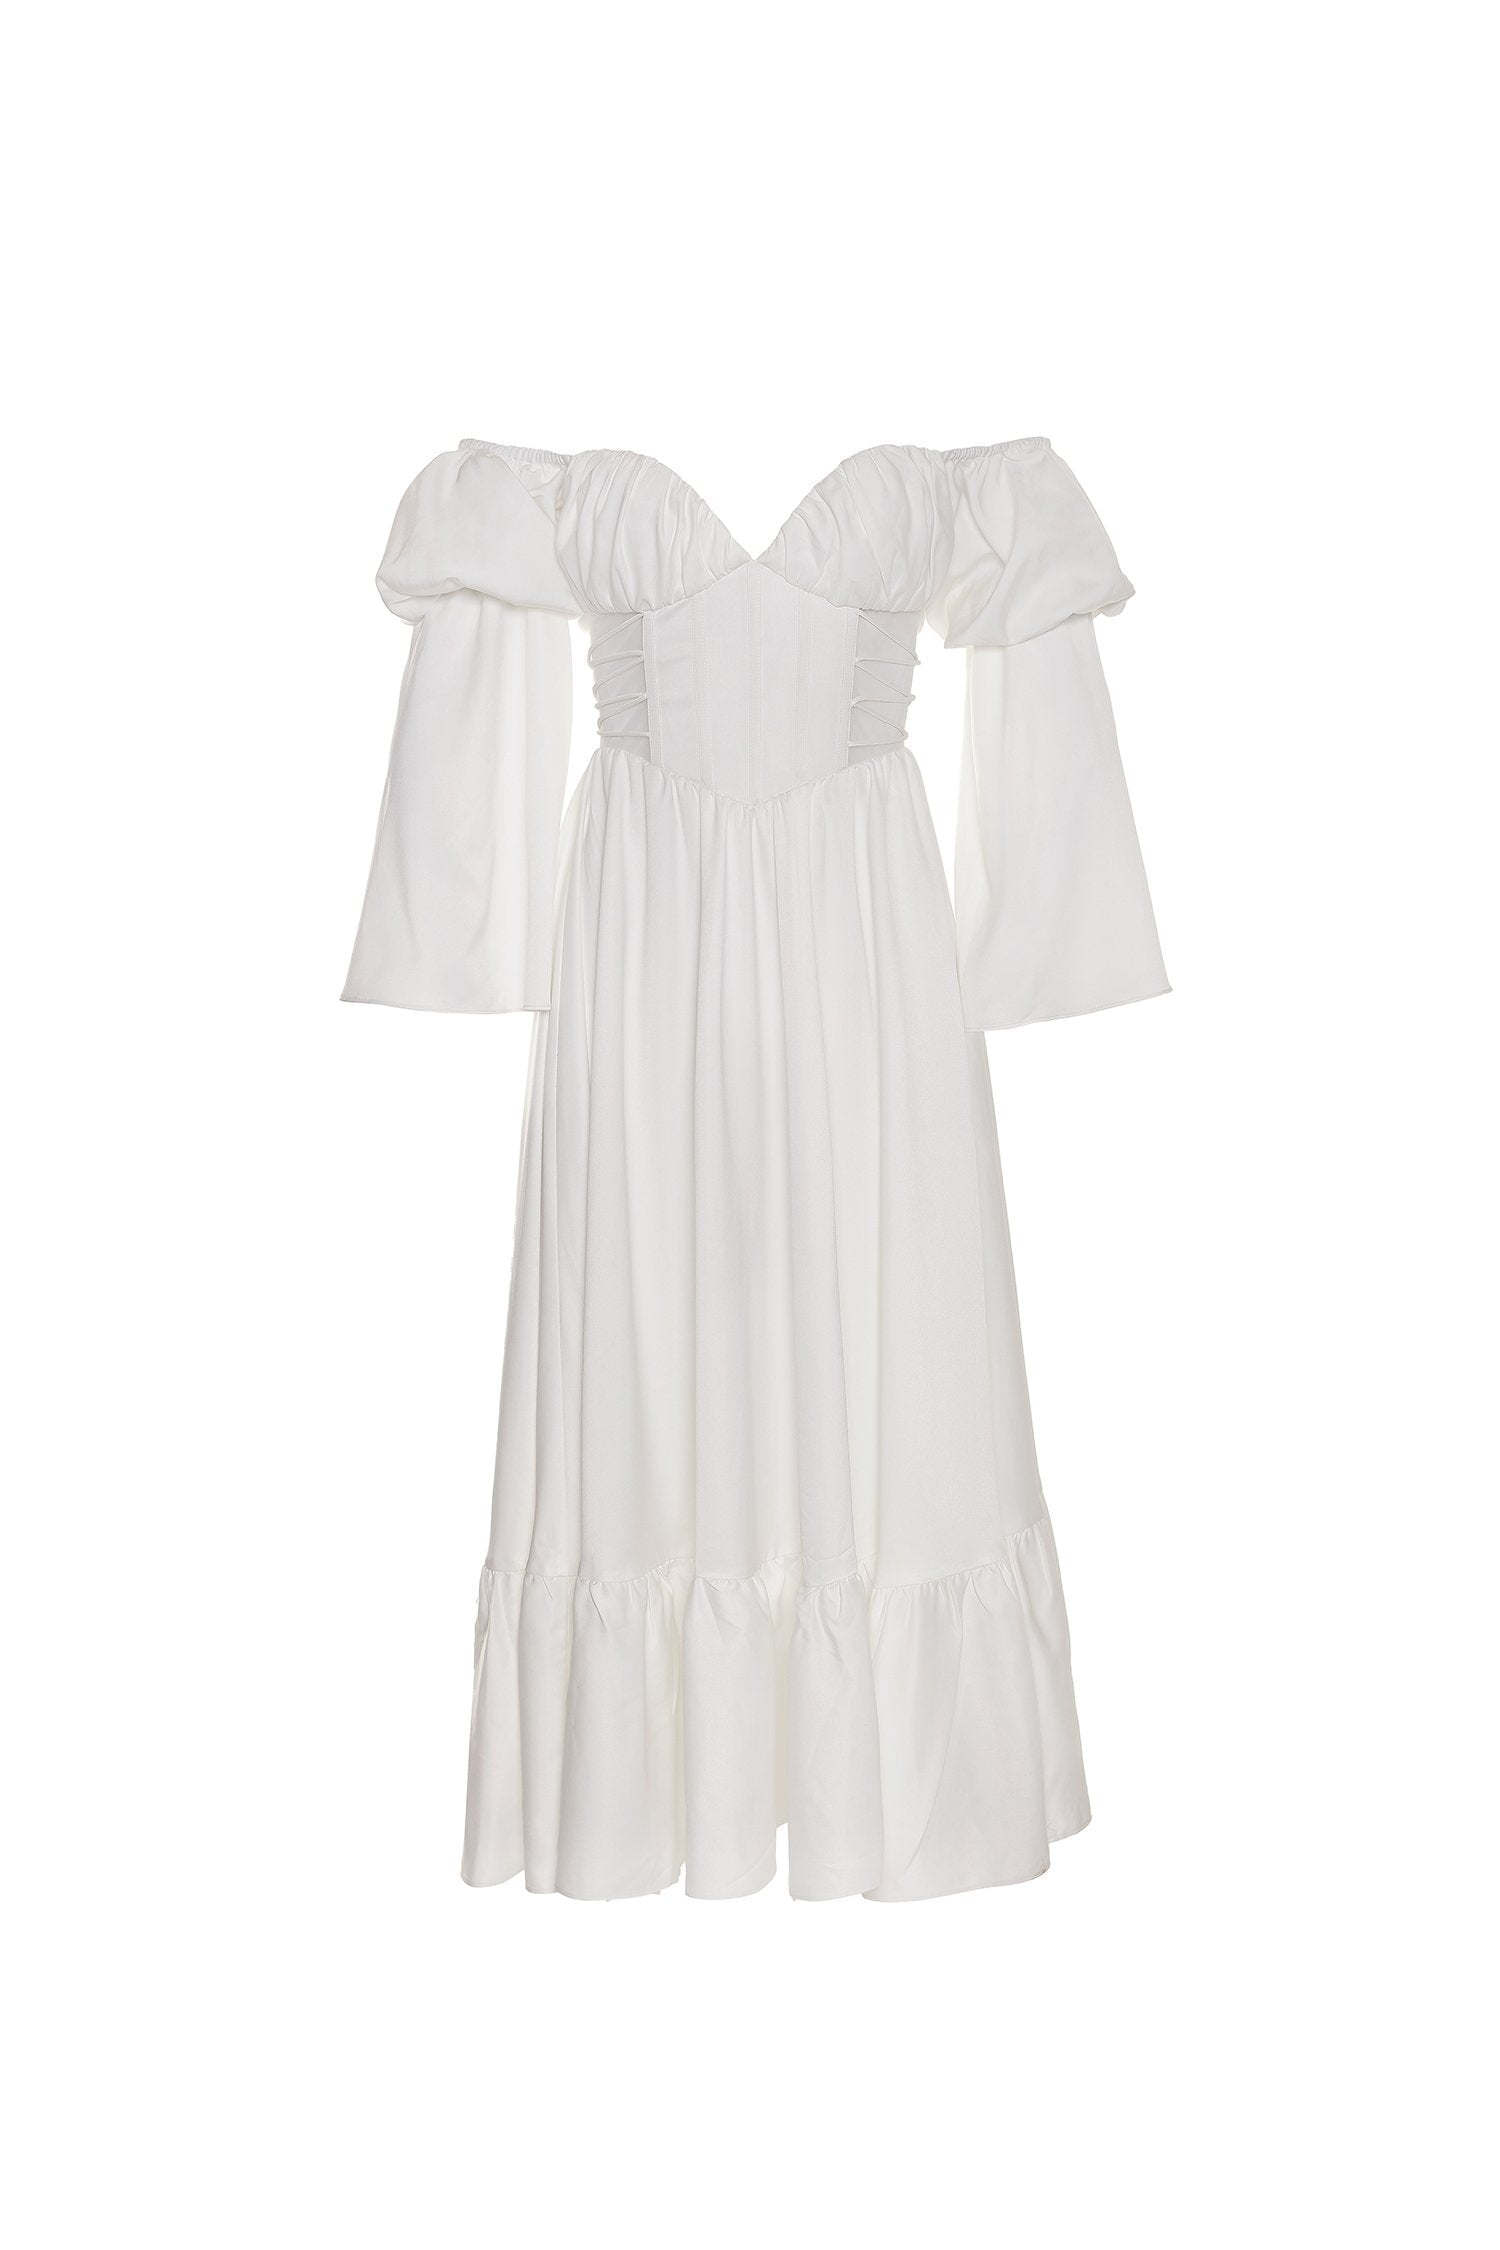 Adena White Satin Midi with Sheer Sides | Afterpay | Zip Pay | Sezzle